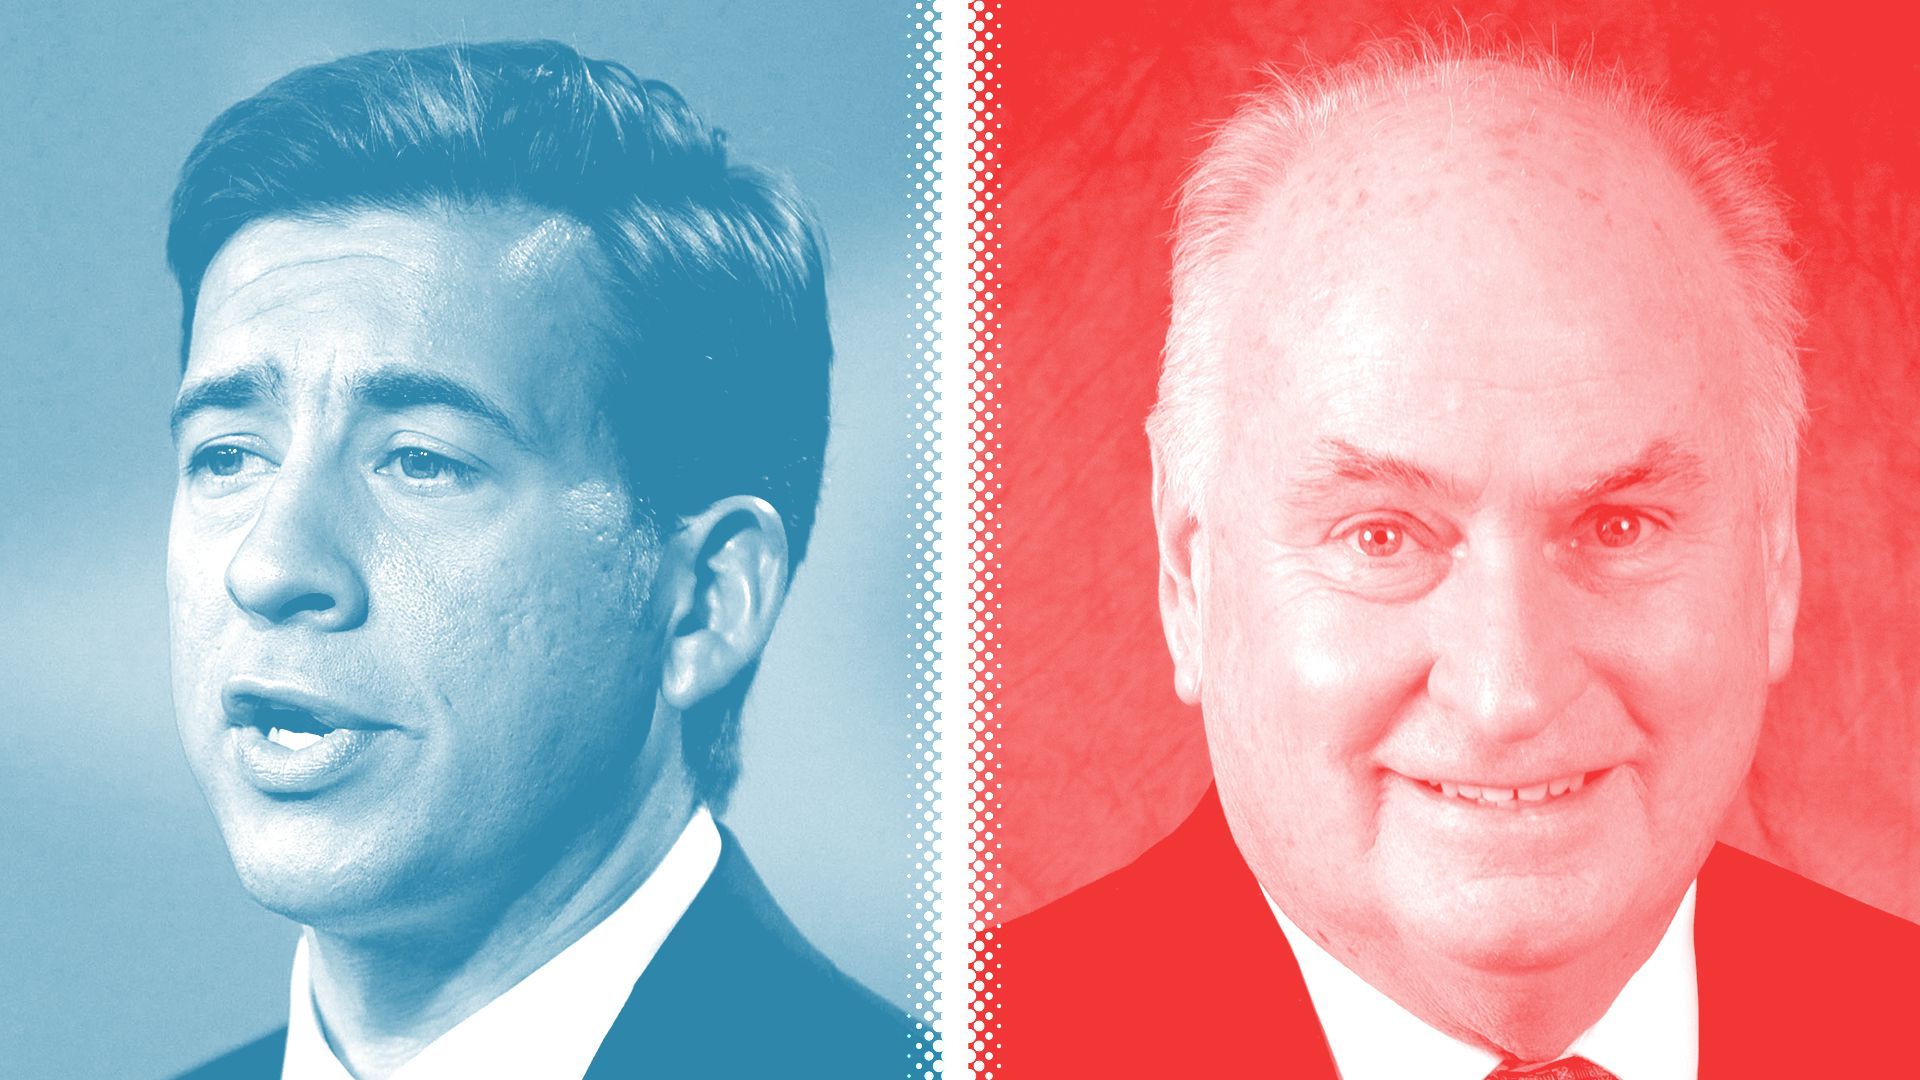 Photo illustration of Alexi Giannoulias, tinted blue, and Dan Brady, tinted red, separated by a white halftone divider.